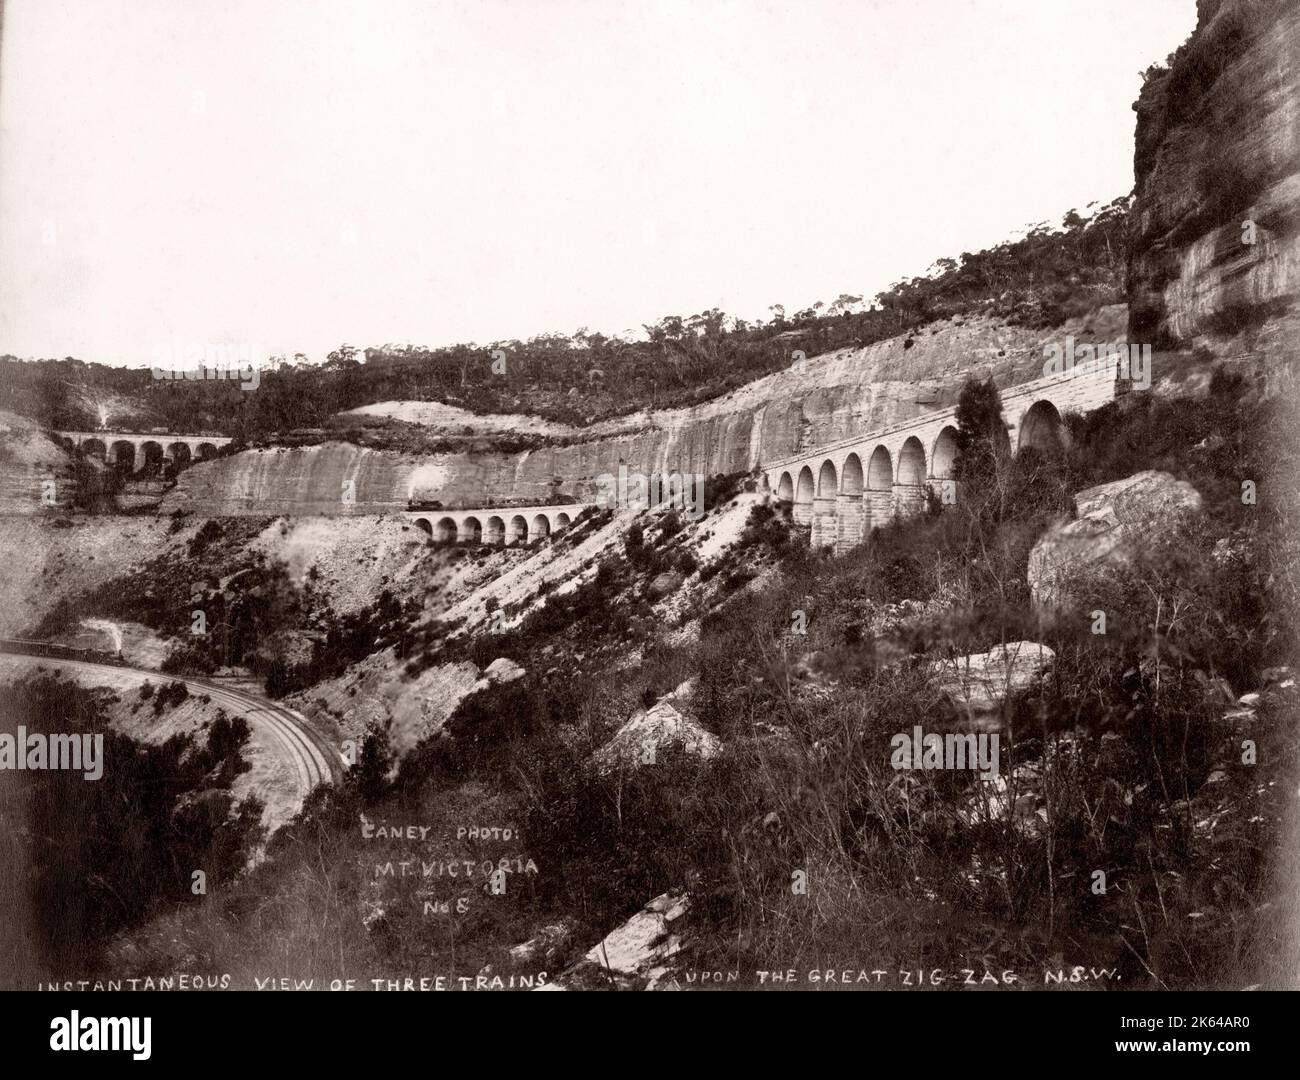 19th century vintage photograph - The Zig Zag Railway, Australian heritage railway, Lithgow in the state of New South Wales,  Blue Mountains. Stock Photo